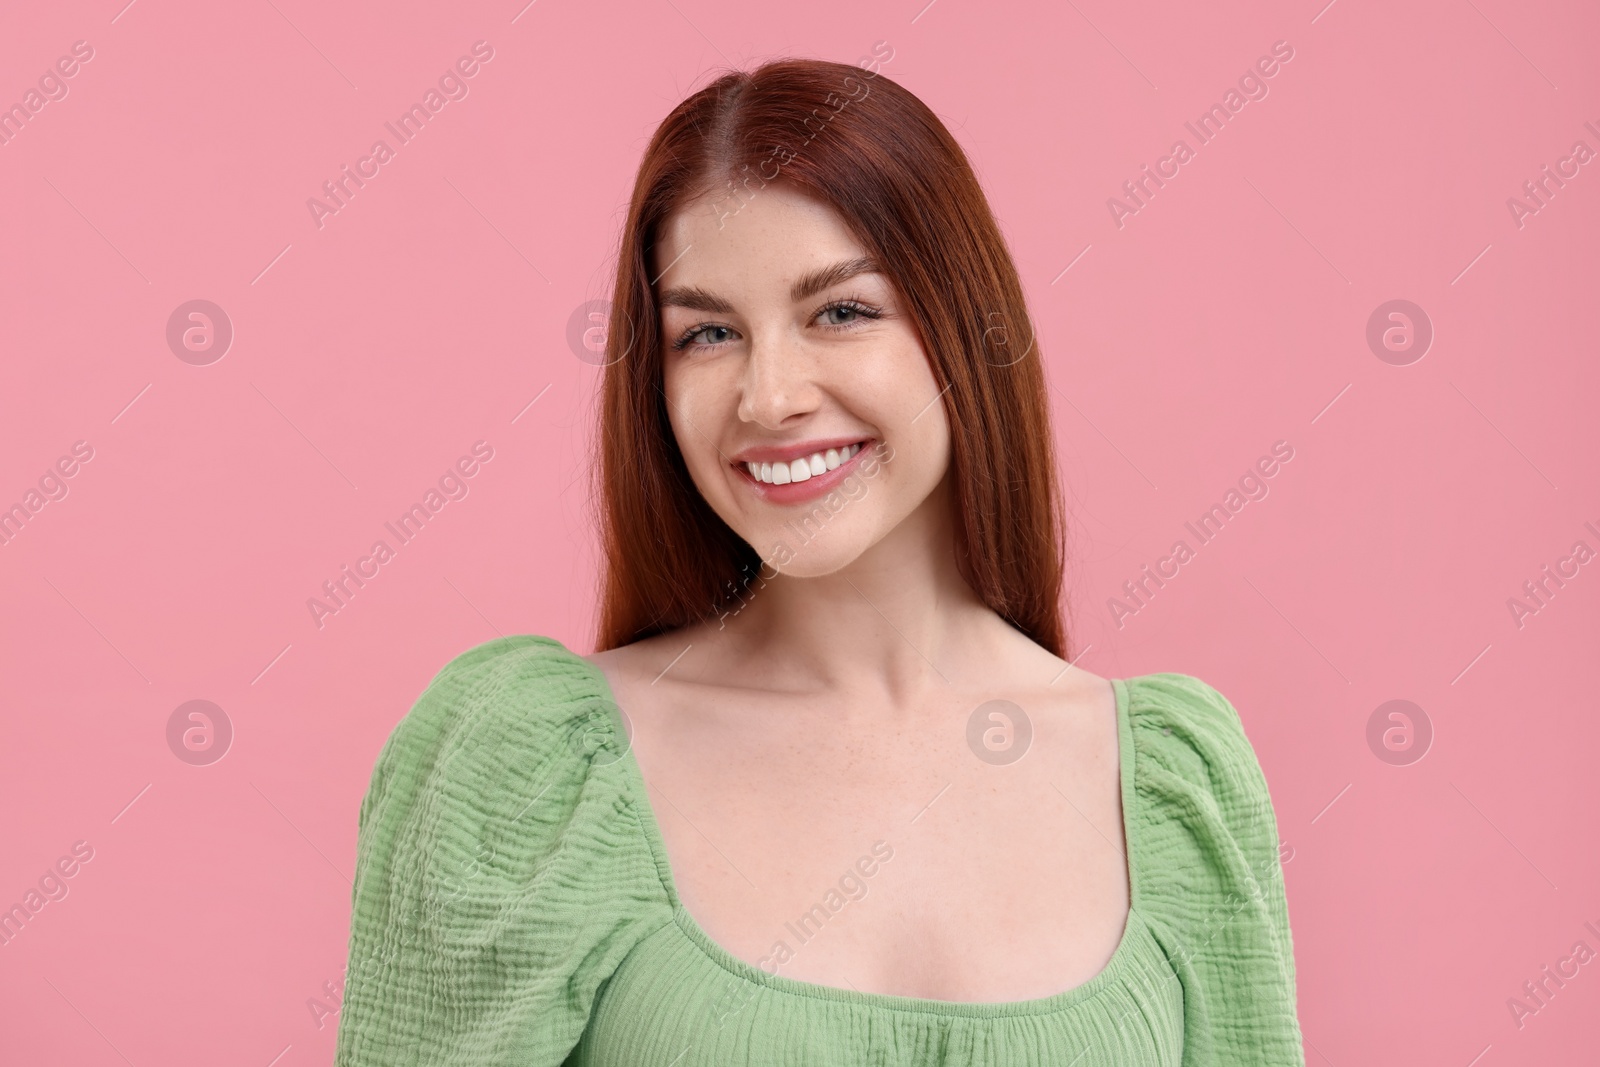 Photo of Portrait of smiling woman with freckles on pink background